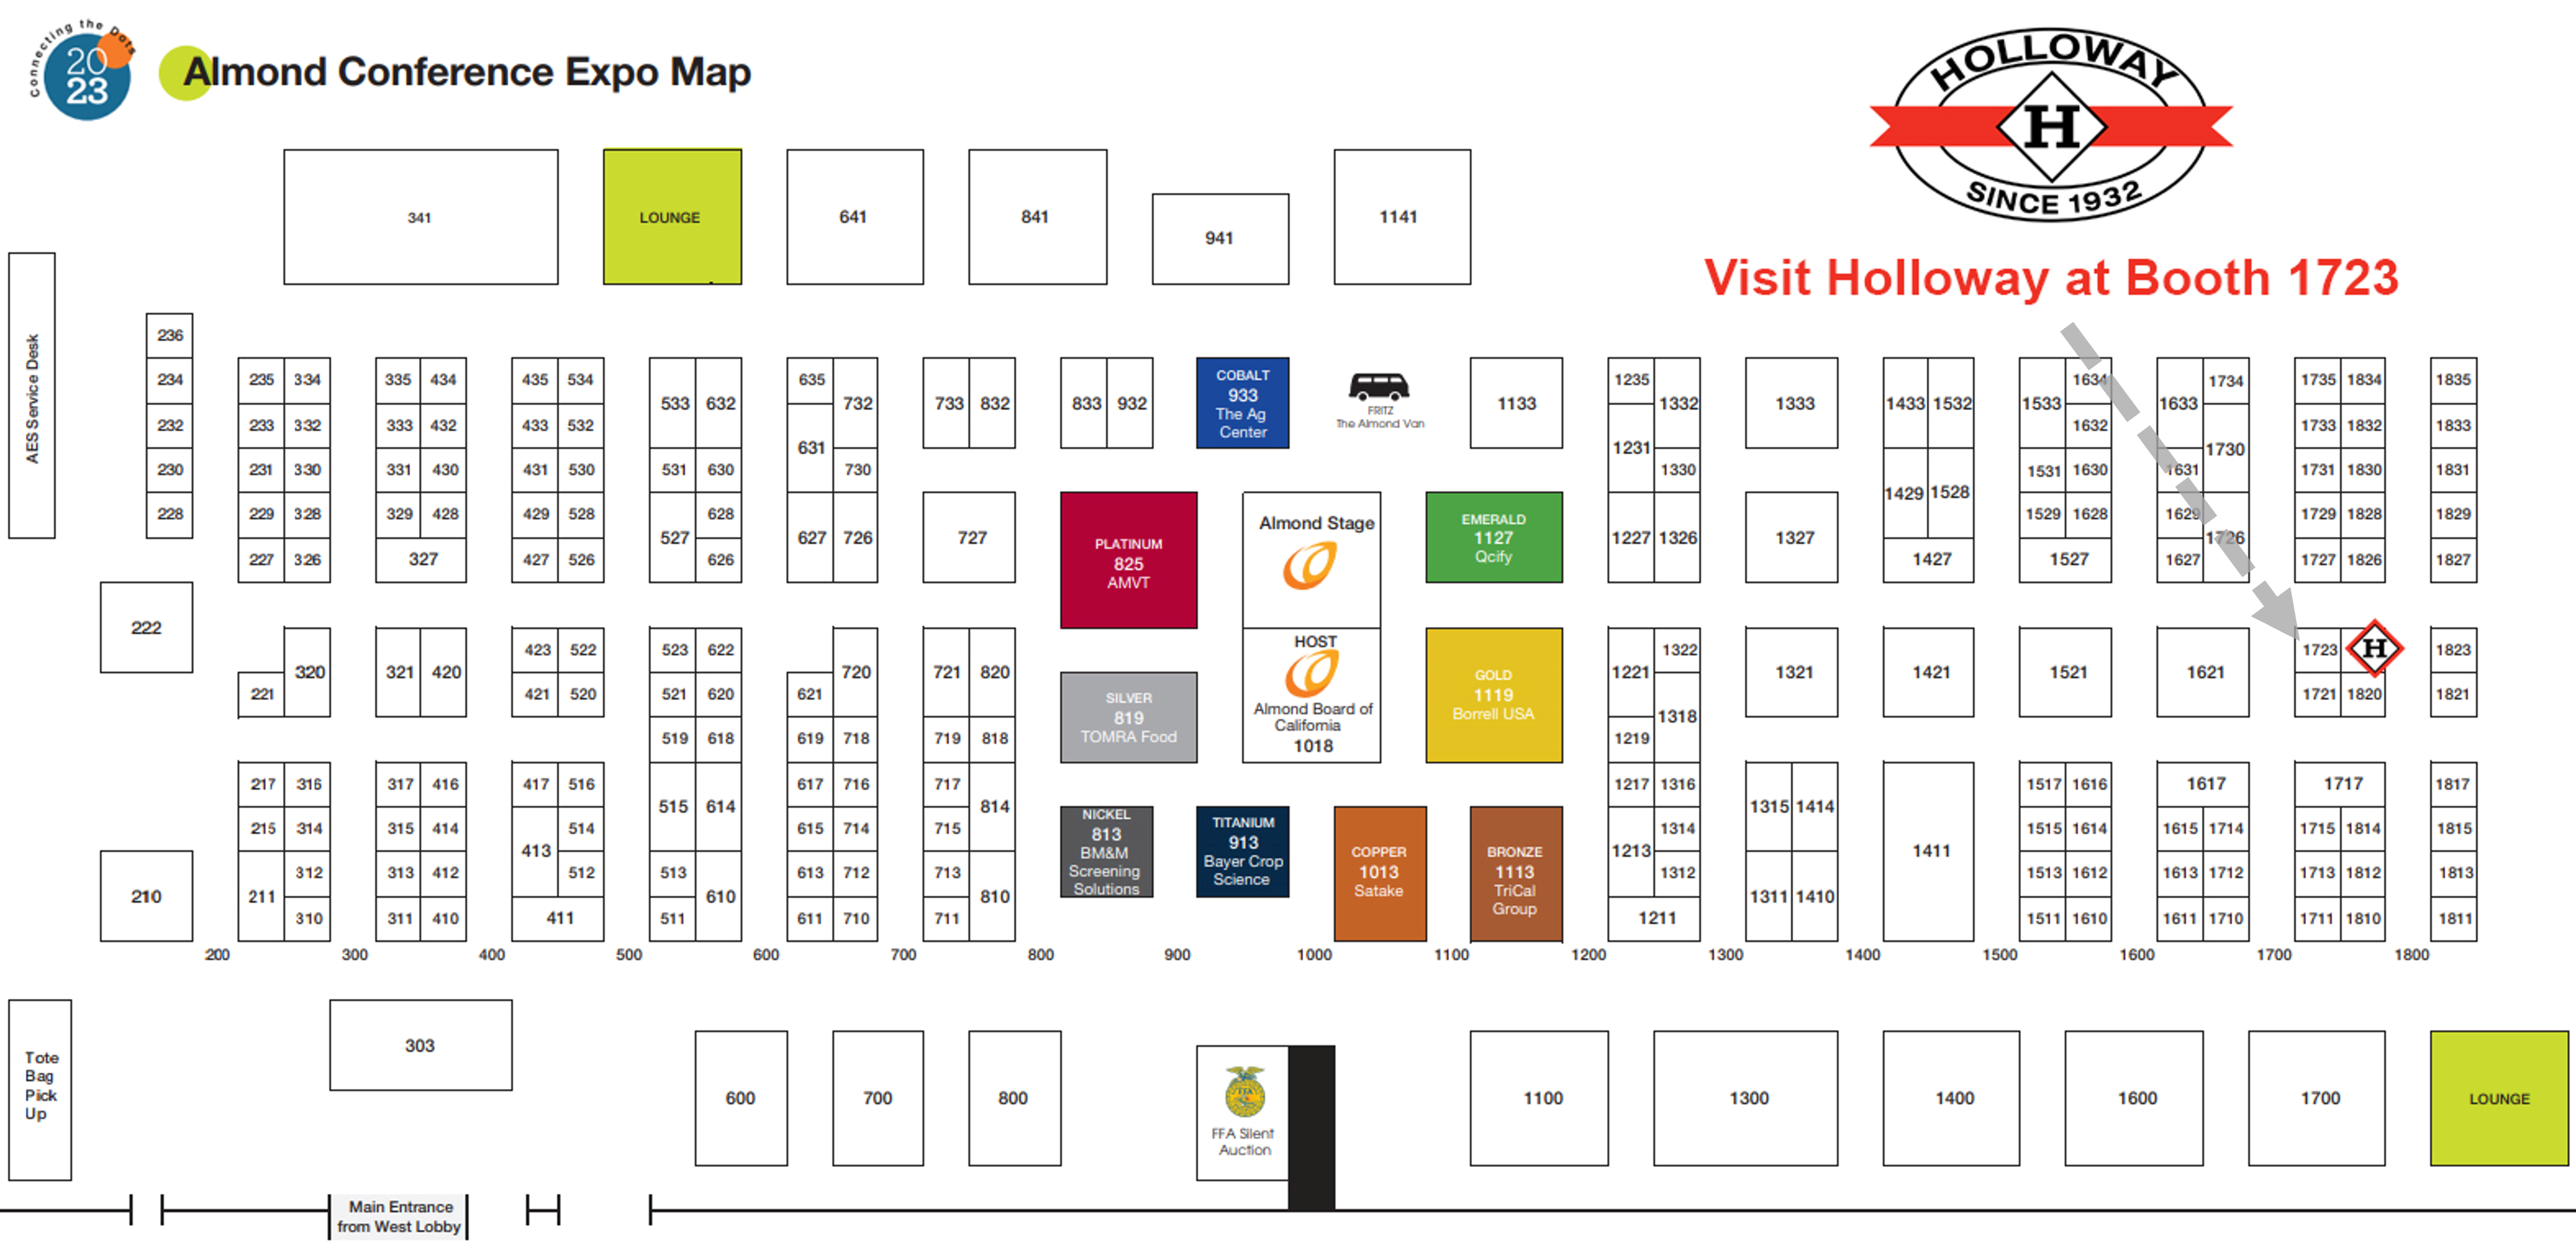 Almond Conference tradeshow map